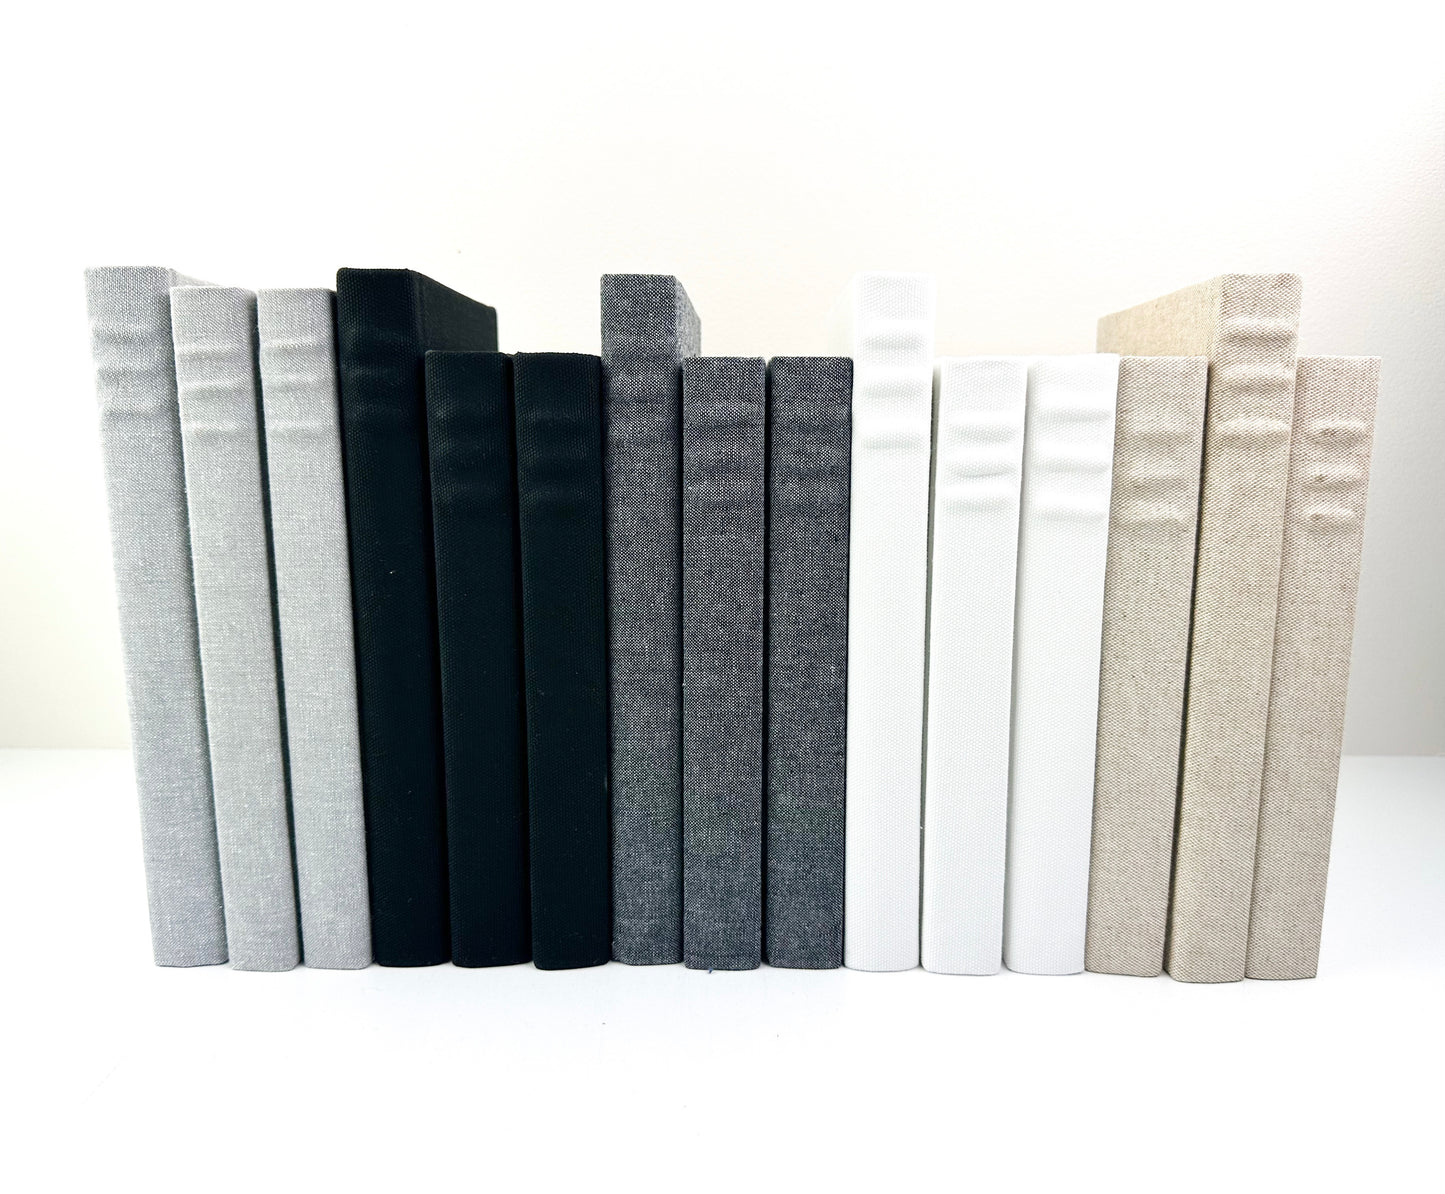 Banded Blemished Books (Set of Three) - Varied Imperfections